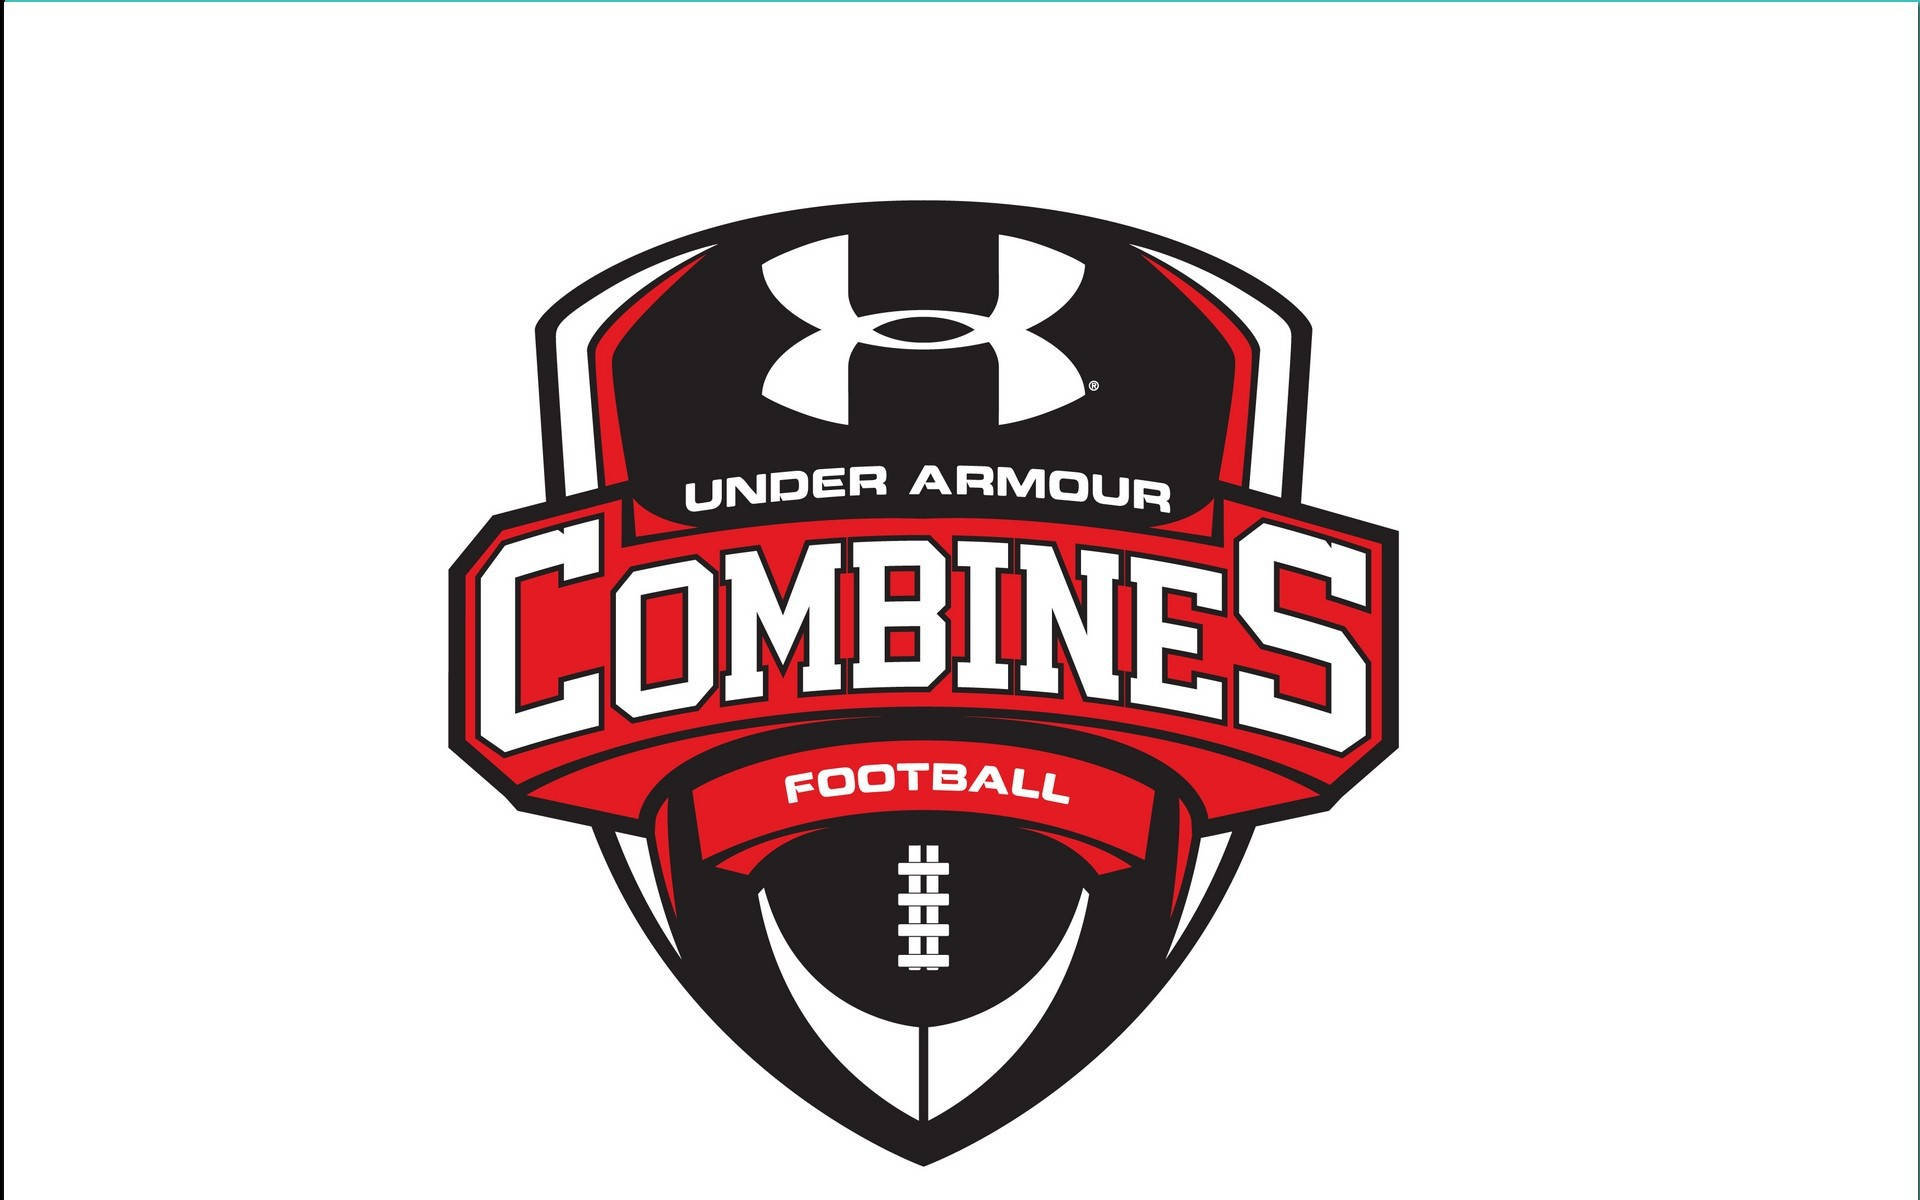 Under Armour Combines Football